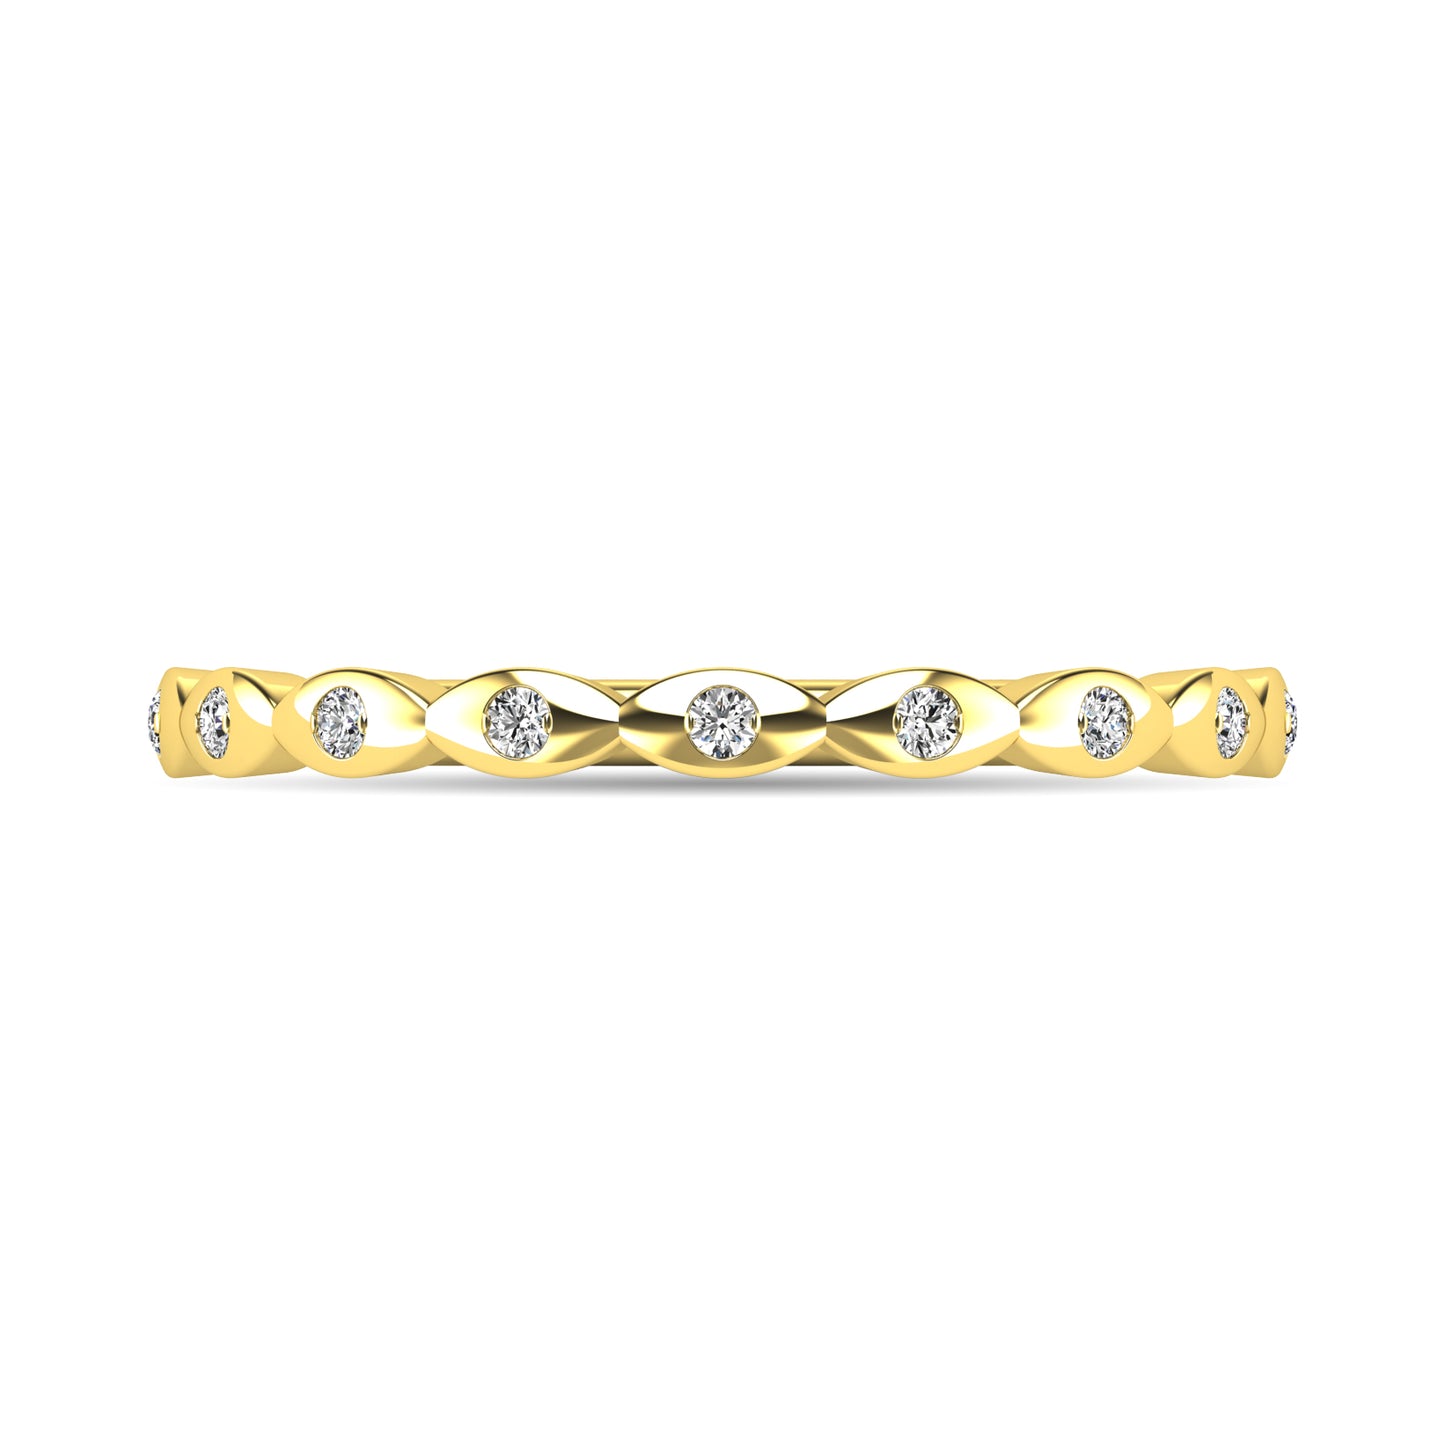 Diamond 1/10 ct tw Stackable Ring in 10K Yellow Gold